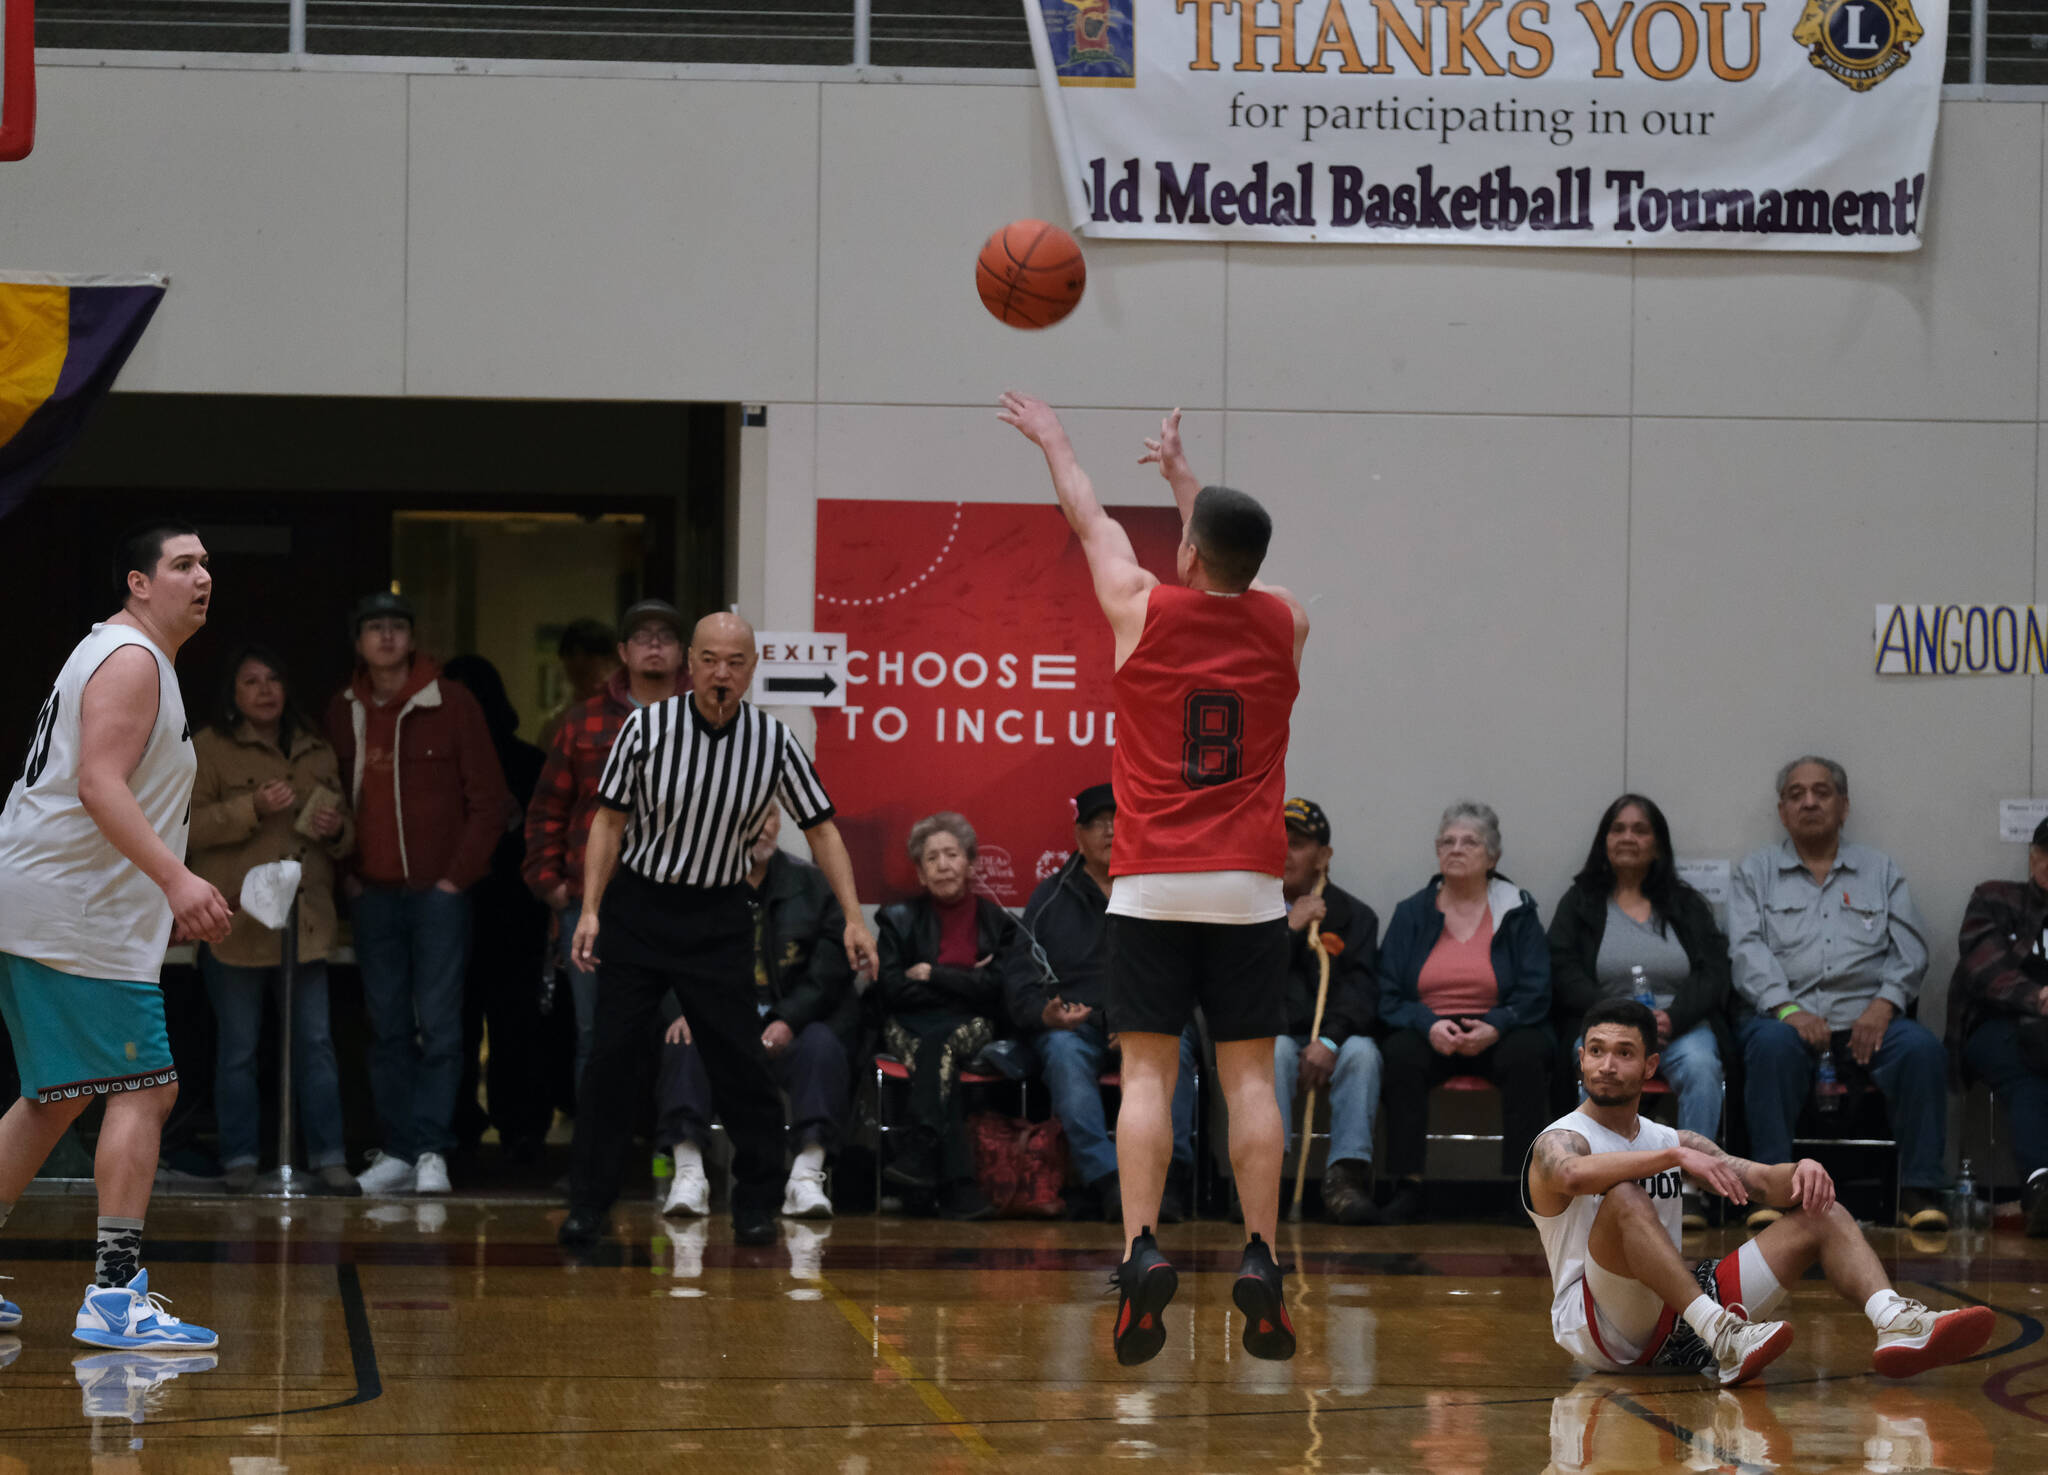 Hydaburg’s Vinnie Edenshaw (8) hits a three-point shot while Angoon’s Kendrick Payton (left) and Aquino Brinson (right) look on during Saturday’s B Bracket double-overtime elimination game. (Klas Stolpe/For the Juneau Empire)